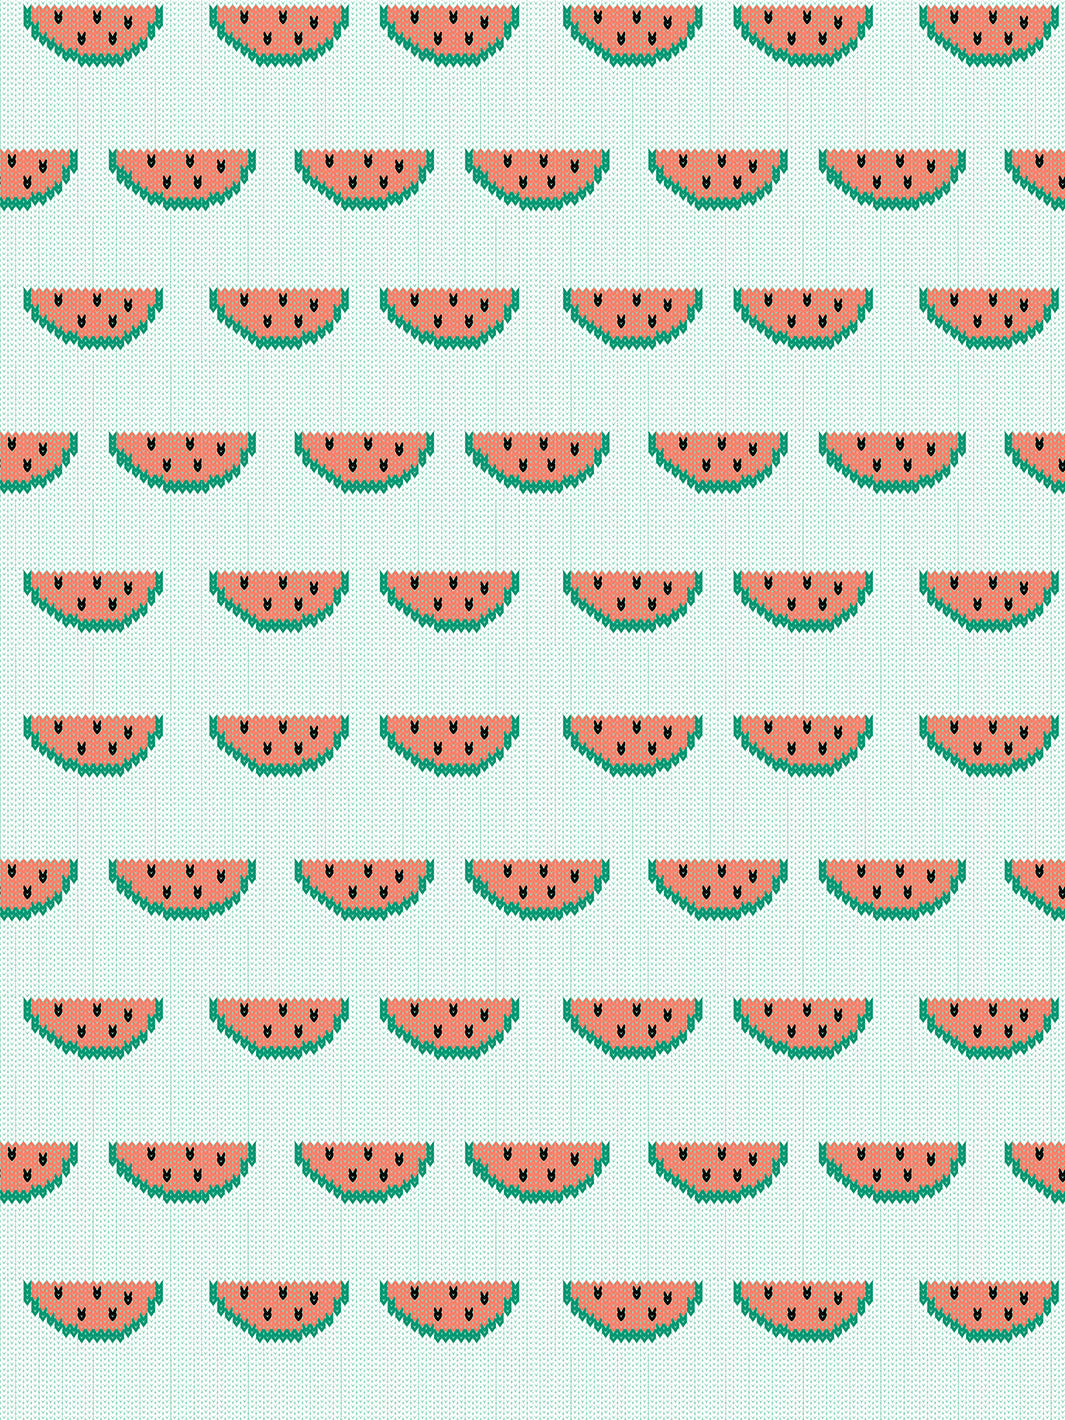 'Watermelon Knit' Wallpaper by Tea Collection - White